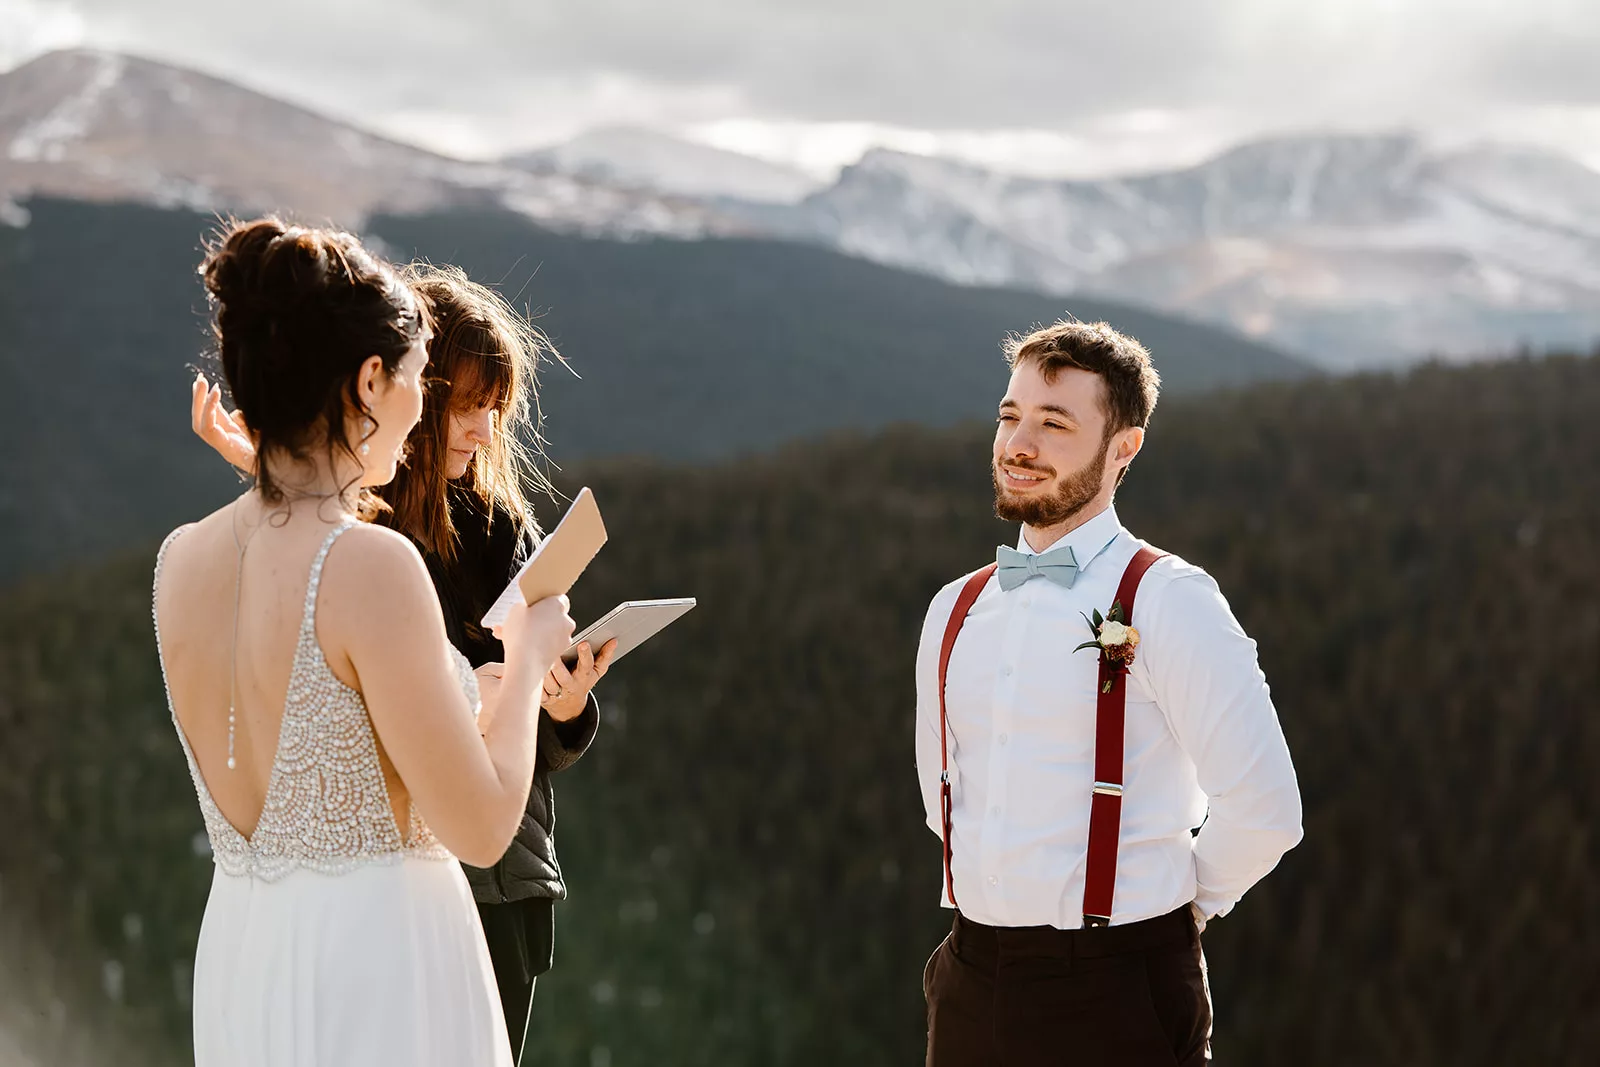 A groom listens to his new bride share her vows during their elopement ceremony.